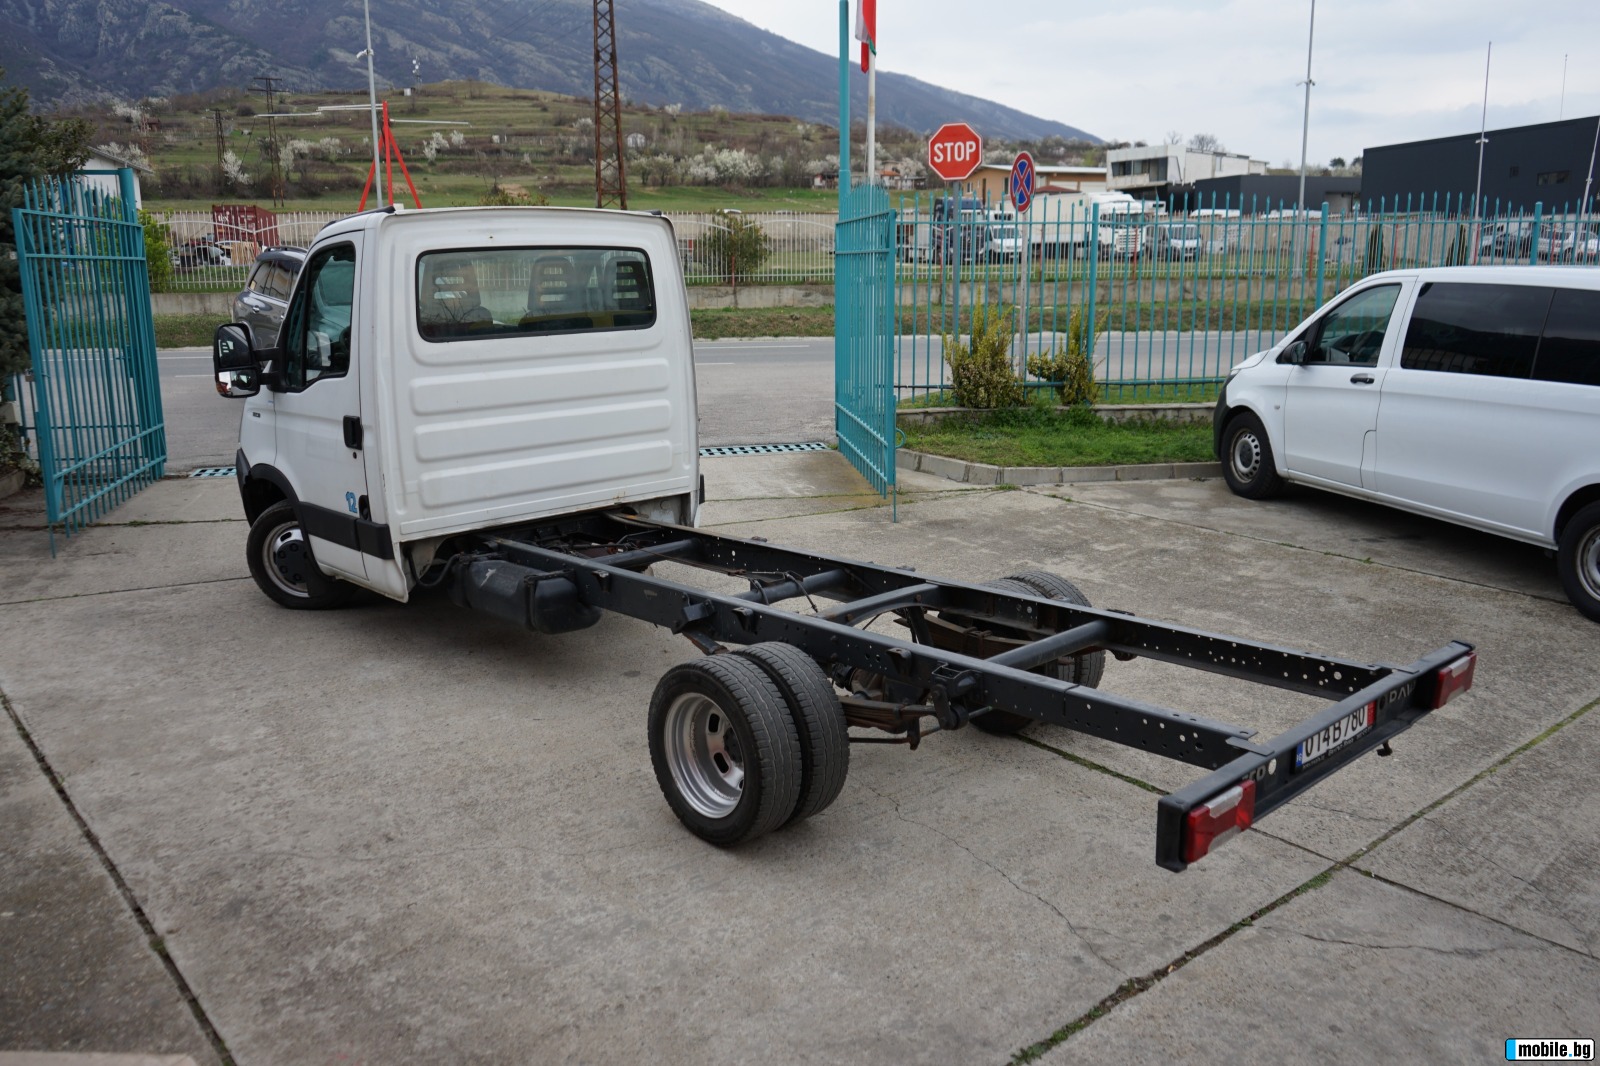 Iveco Daily 35c18* 3.0HPT*  | Mobile.bg   10